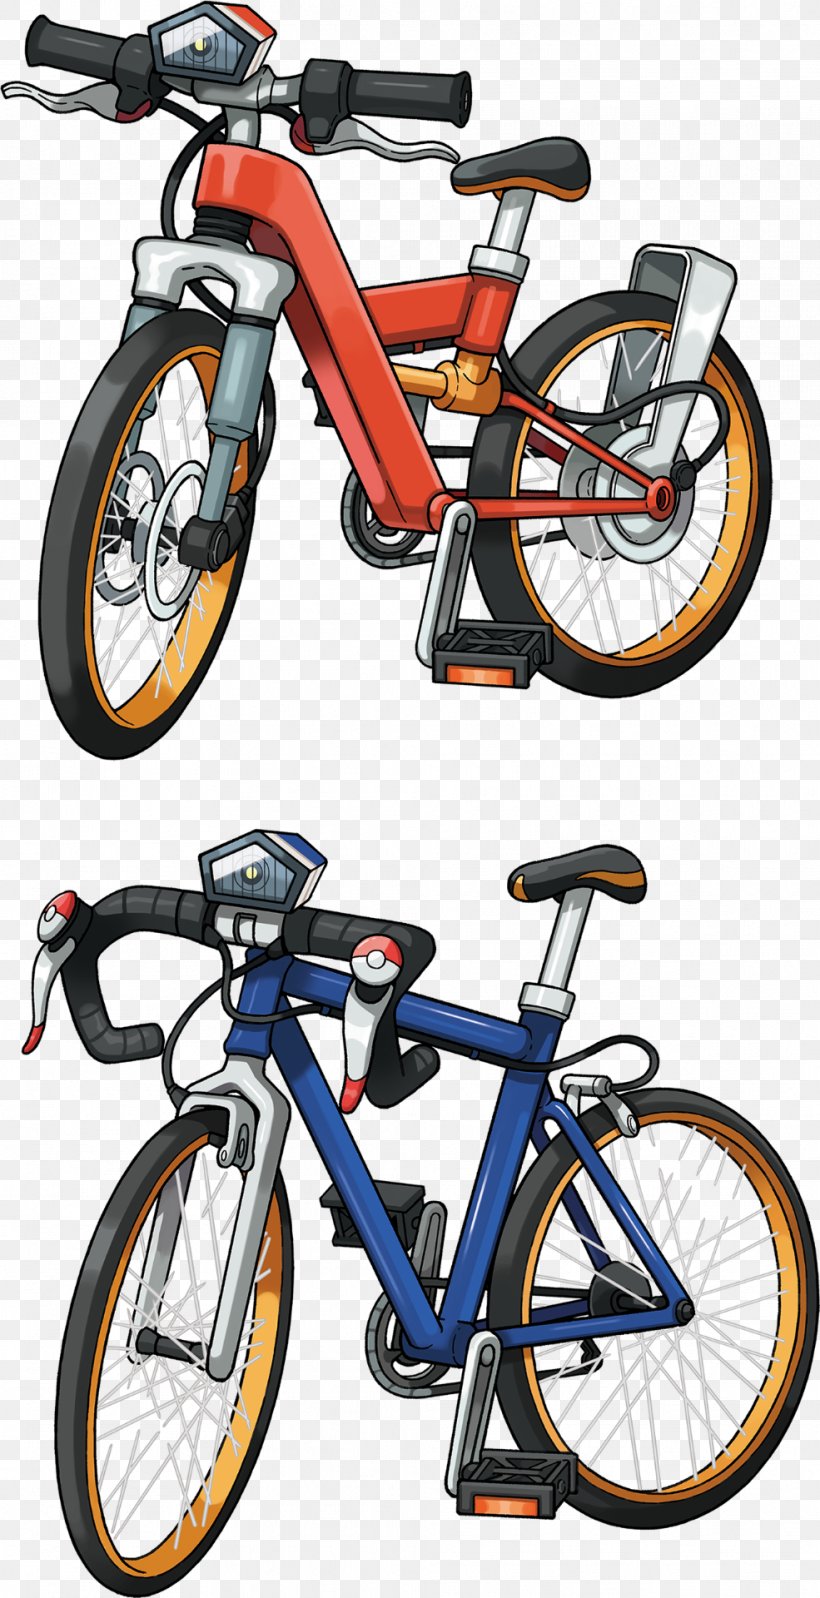 Pokémon Omega Ruby And Alpha Sapphire Pokémon Ruby And Sapphire Bicycle Pokémon Trading Card Game, PNG, 985x1920px, Pokemon Ruby And Sapphire, Ash Ketchum, Automotive Design, Bicycle, Bicycle Accessory Download Free